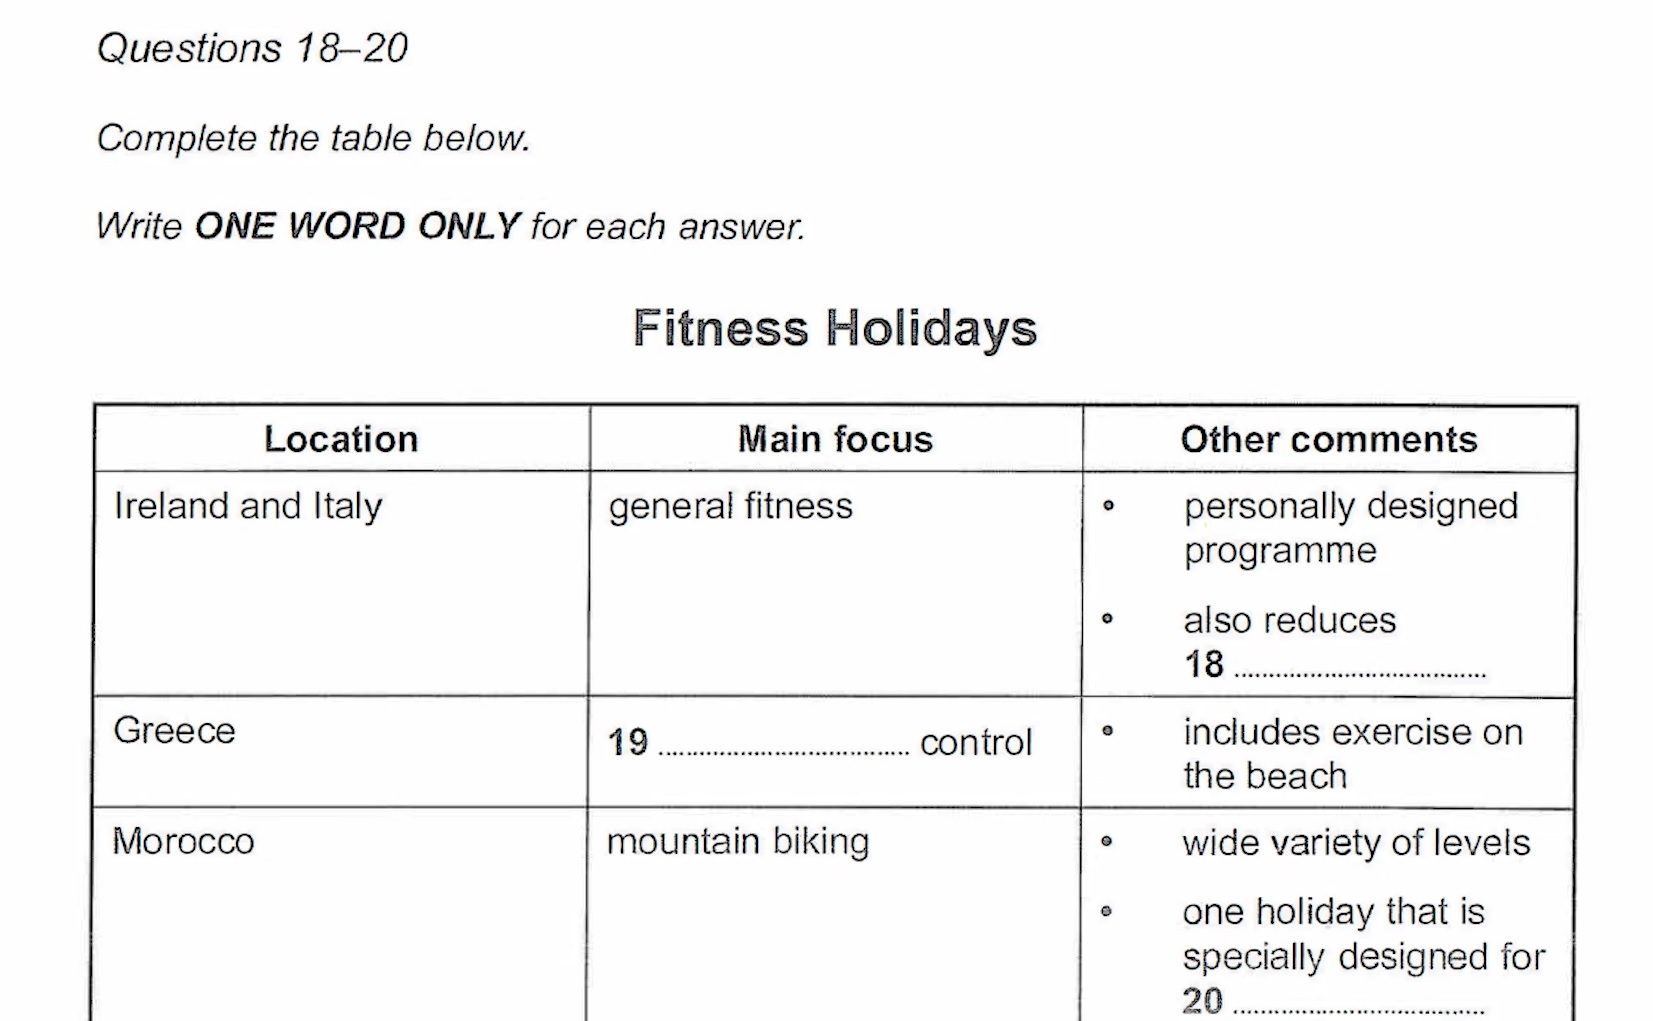 Table Completion - Book 12A Test 7 Part 2 - Fitness Holidays Part 1